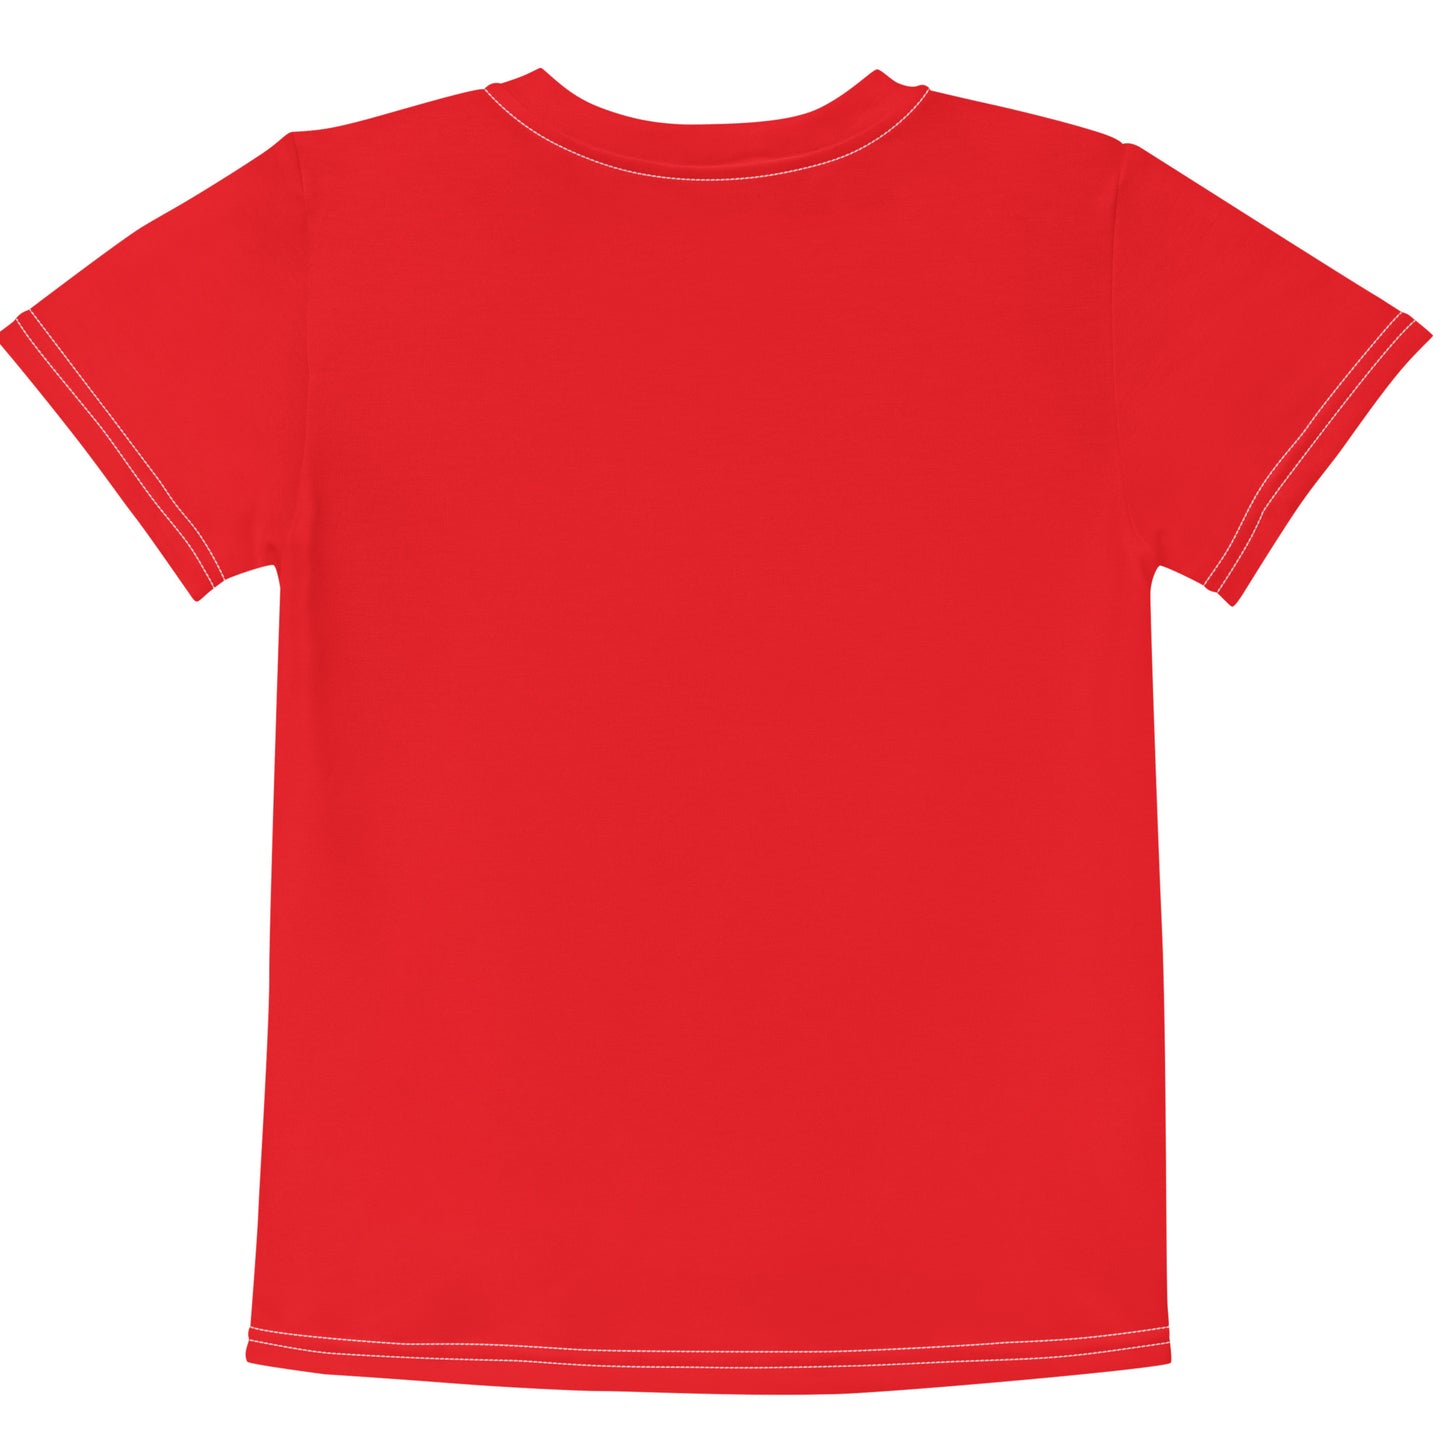 Canada Flag - Sustainably Made Kids T-shirt